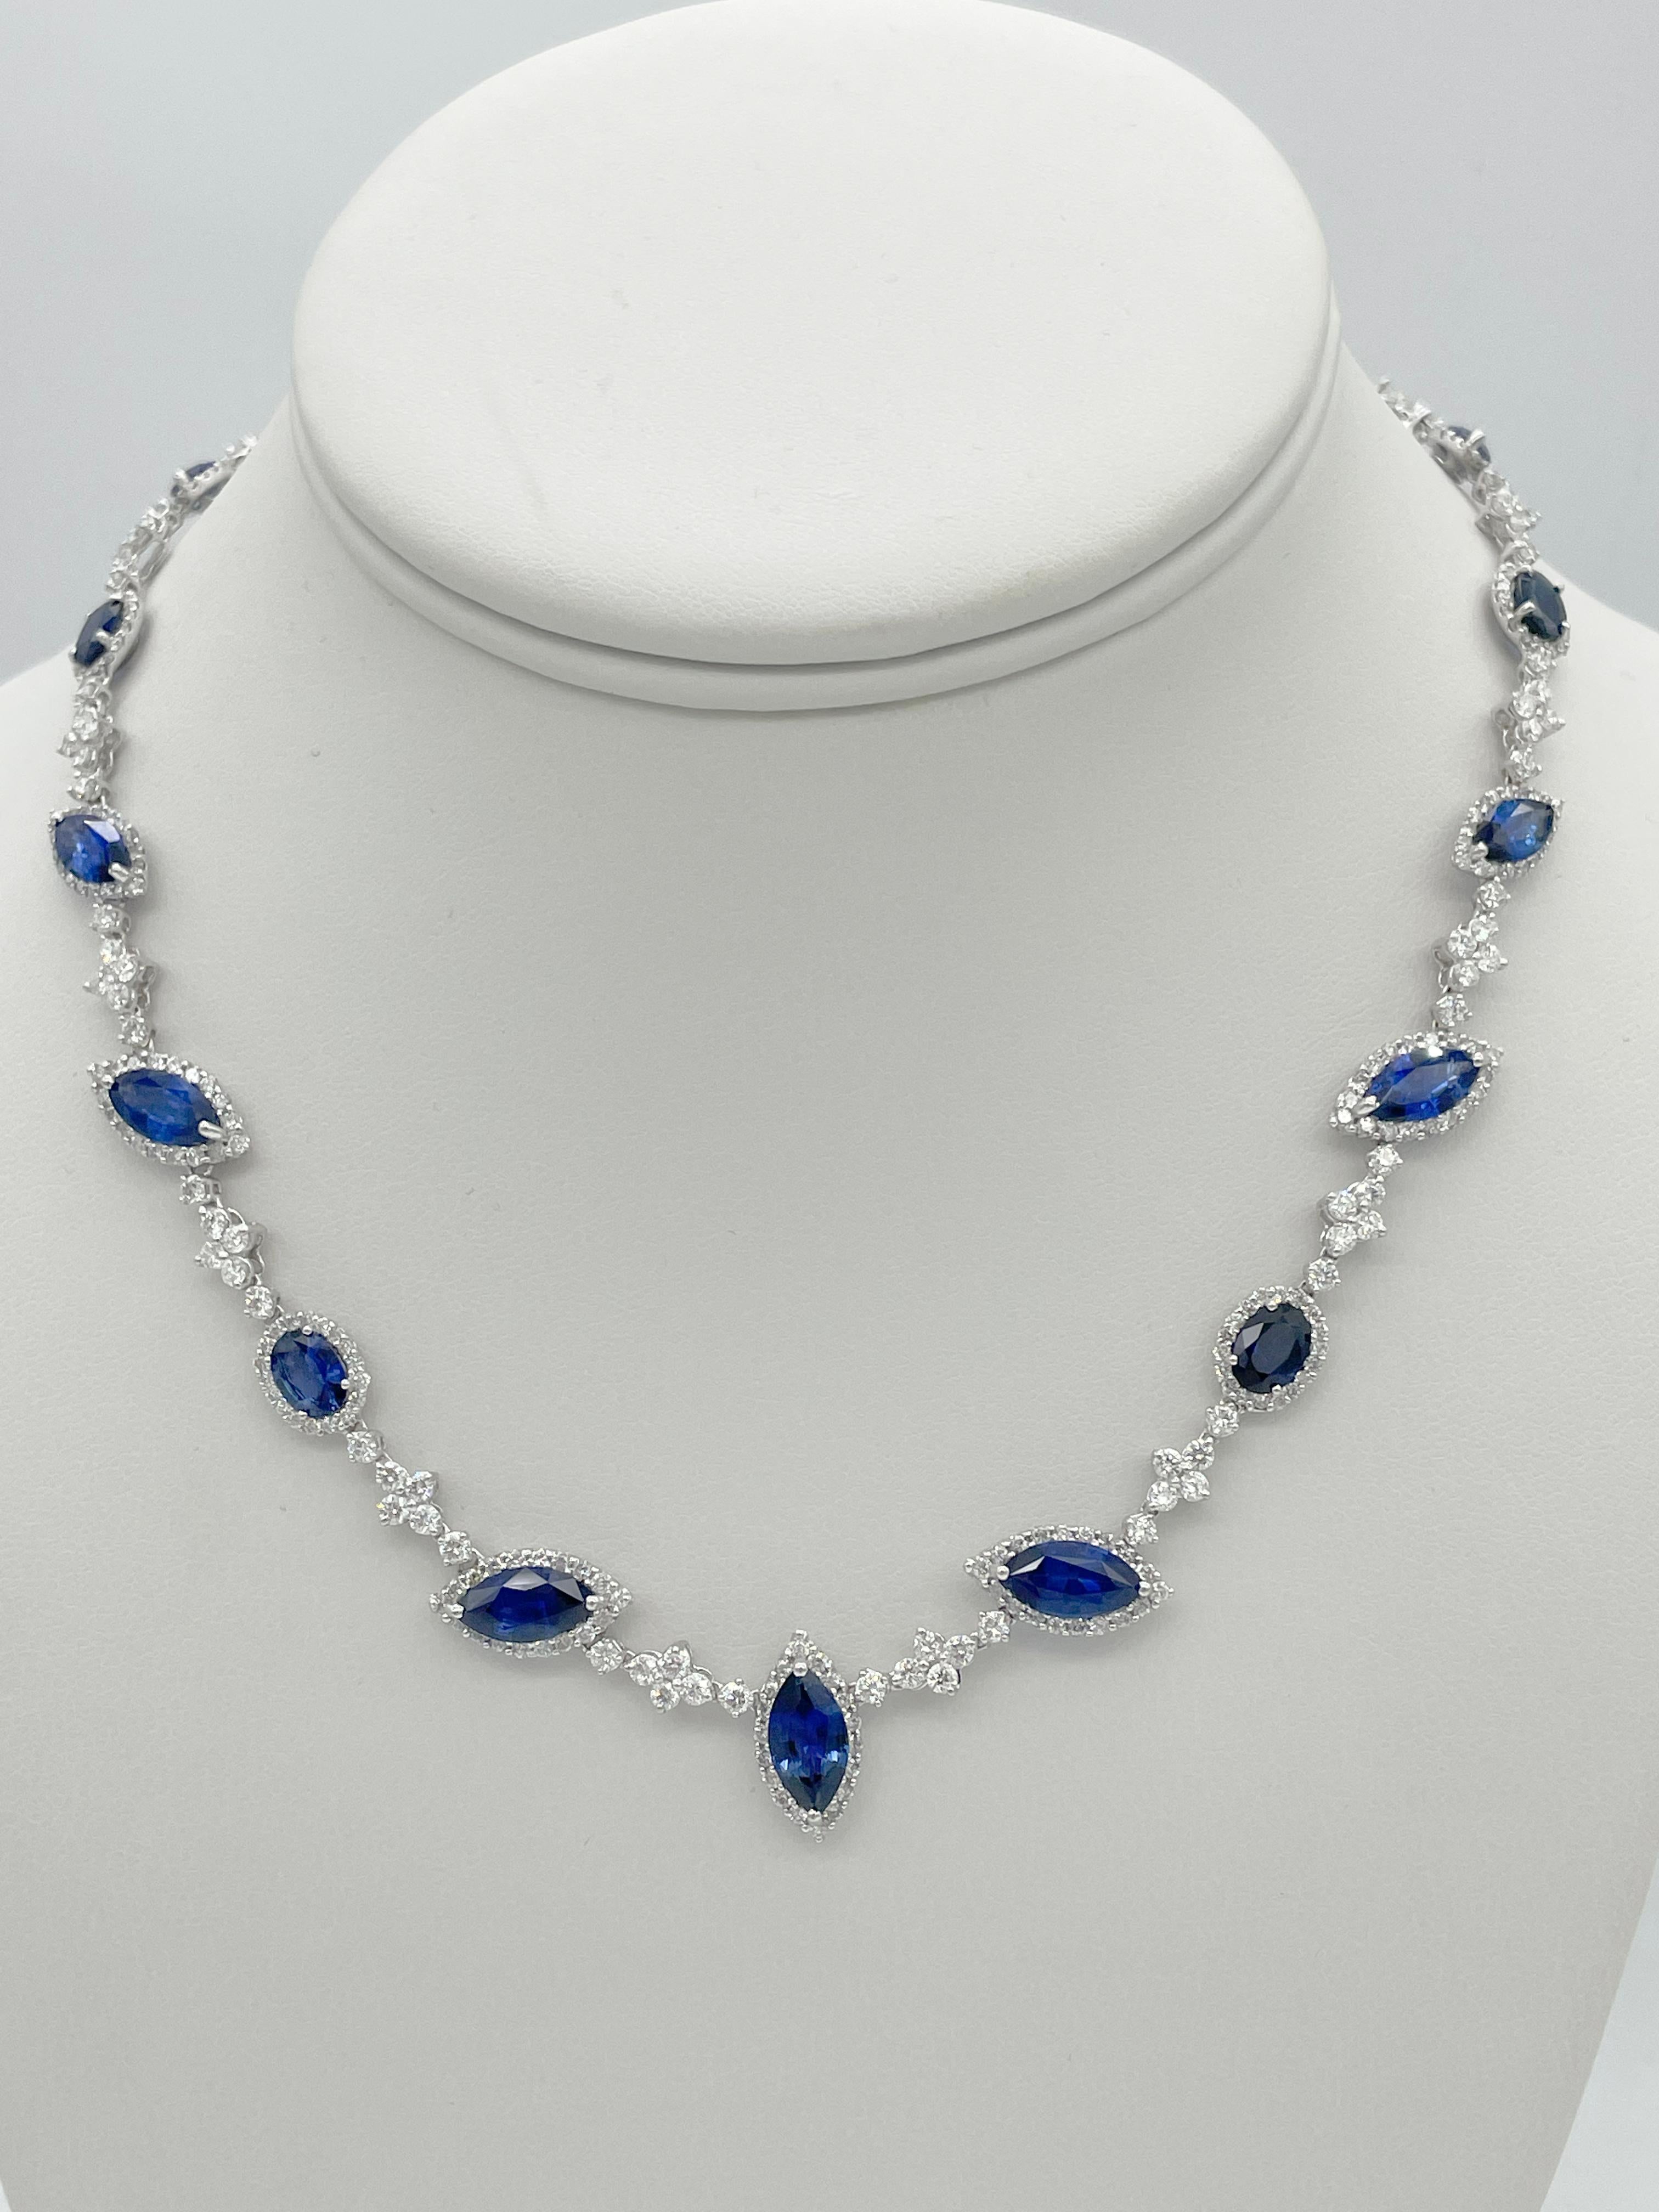 28.30 Total Carat Fancy Sapphire and Diamond, White Gold Necklace

This spectacular Blue Sapphire and Diamond necklace showcases a total 20.20 carats of Marquise and Oval cut sapphires of amazing color and quality. The conceal clasp features a